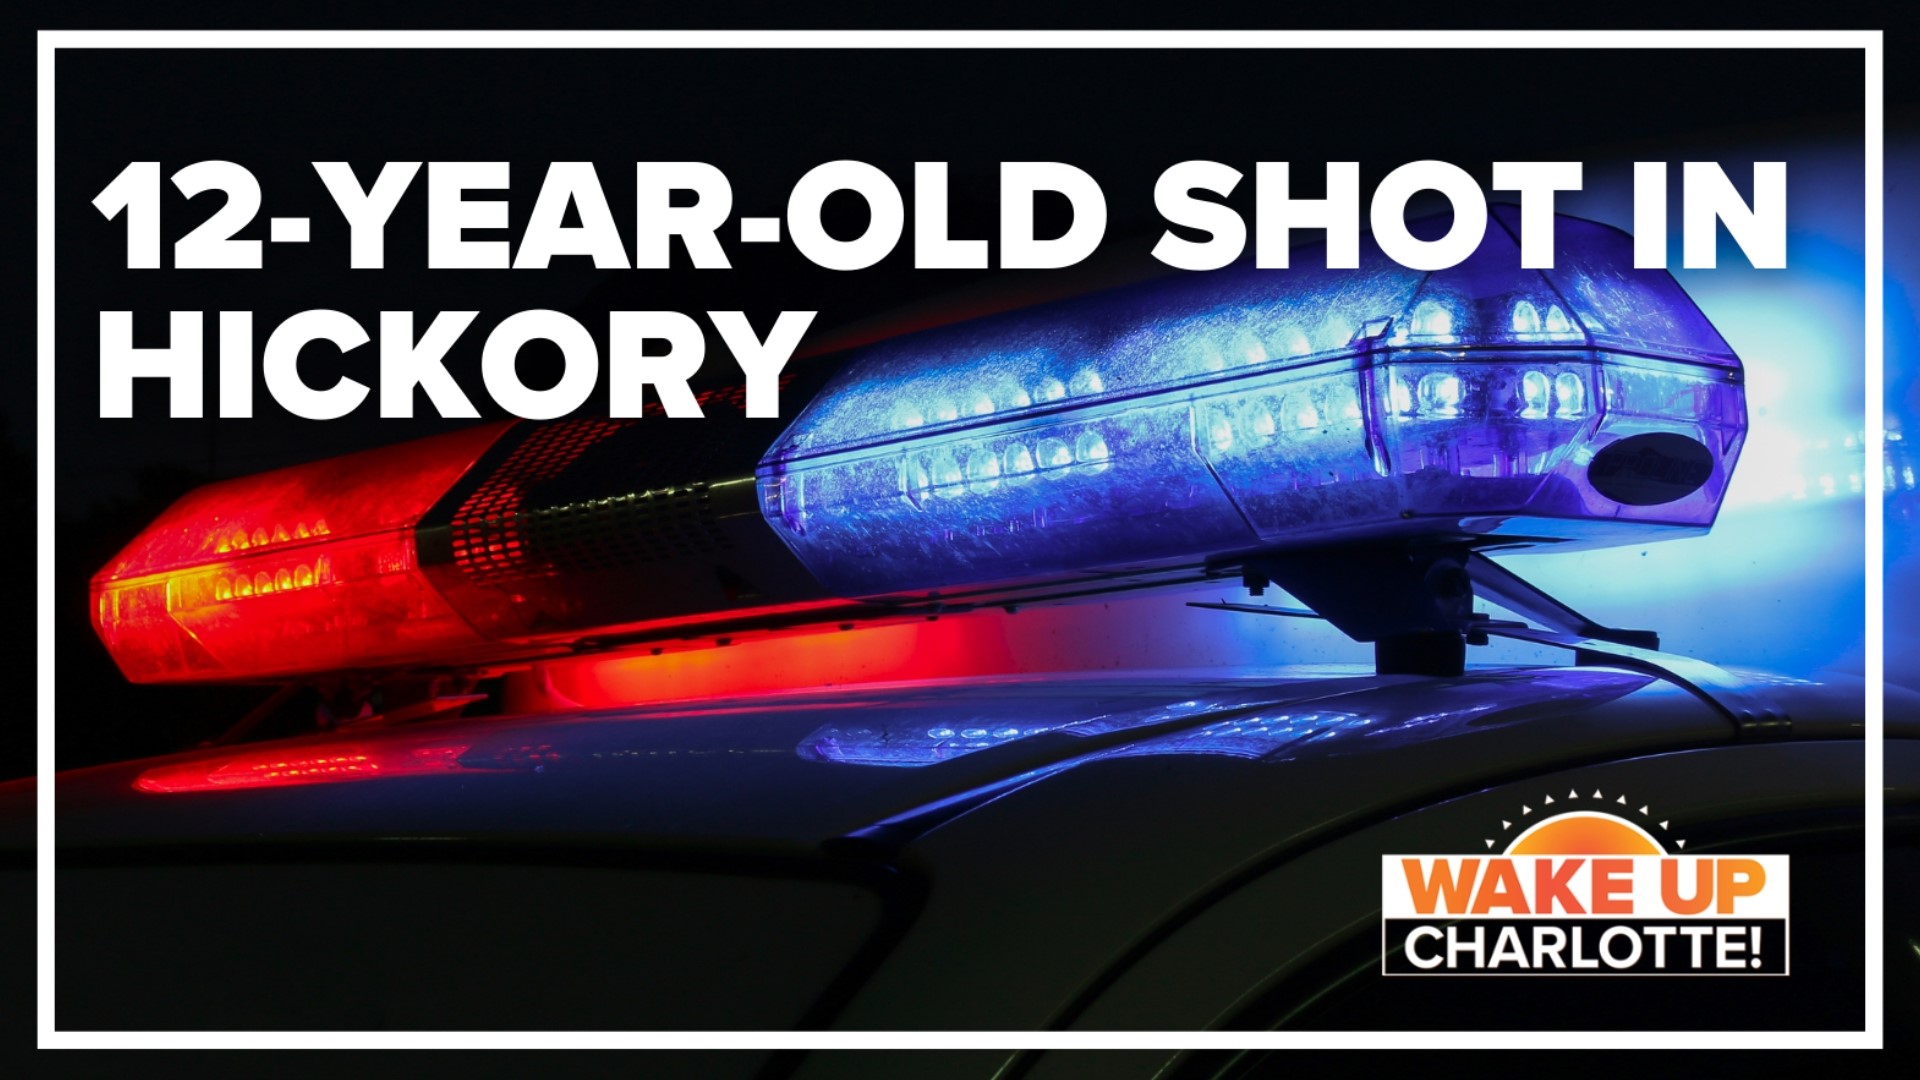 We're learning a 12-year-old boy in Hickory is recovering after getting shot.